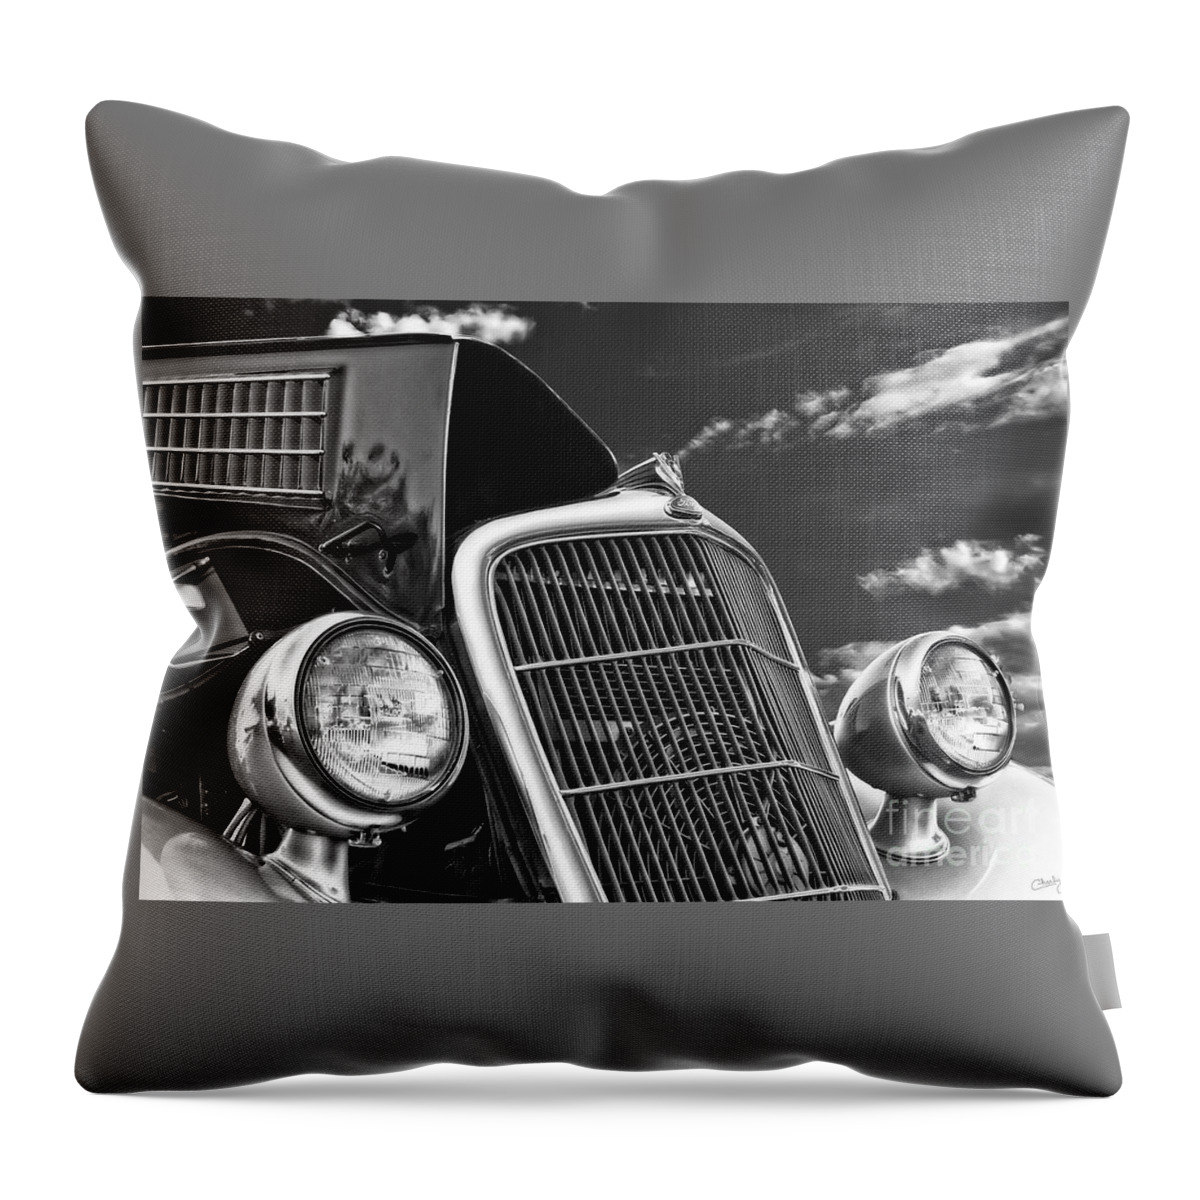 1934 Ford Throw Pillow featuring the photograph 1934 Ford Frontend by Imagery by Charly